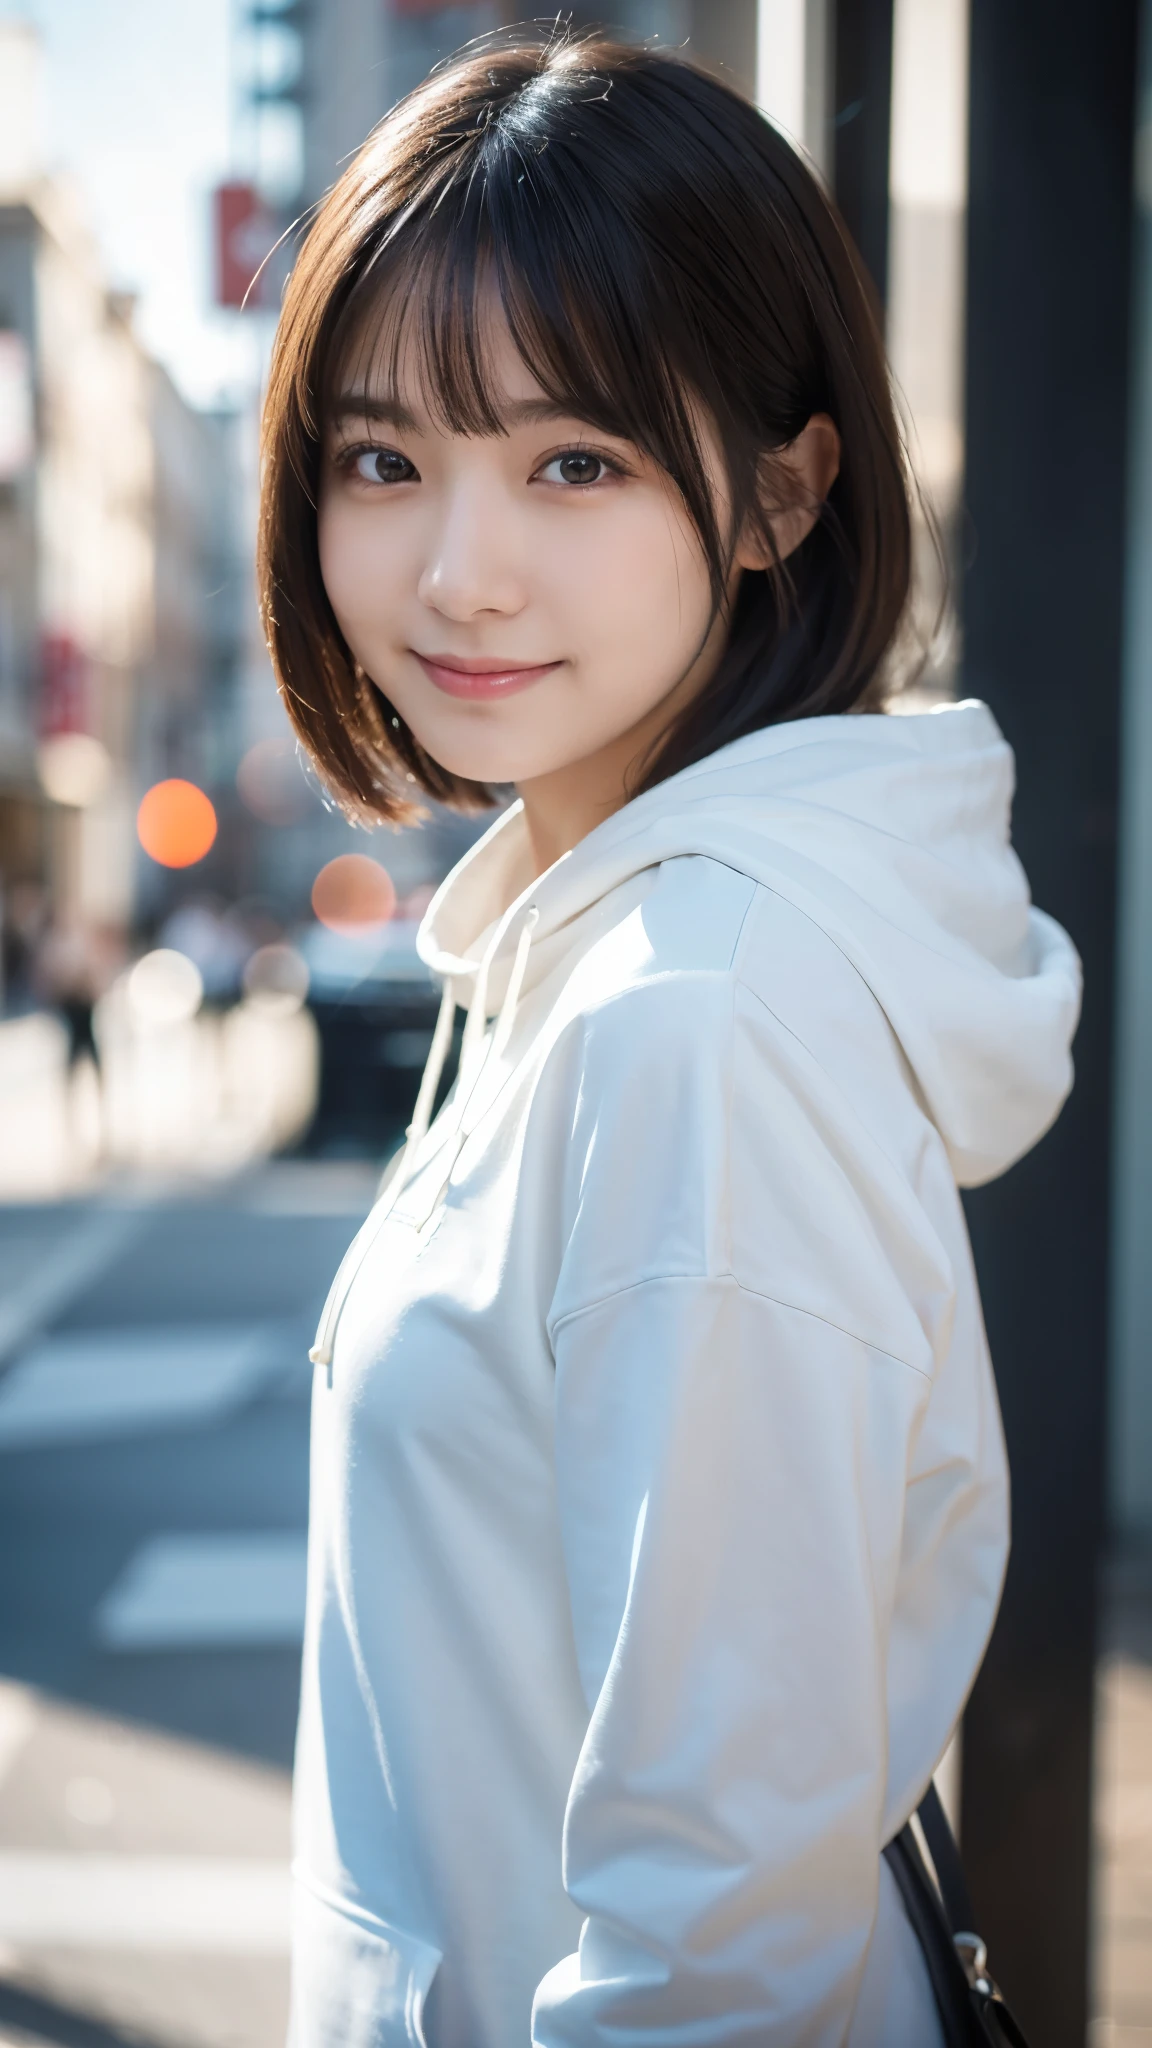 (highest quality,masterpiece:1.3,ultra high resolution),(Super detailed,caustics,8k),(photorealistic:1.4,RAW shooting),1 girl,(look at the camera with a smile),side shot,20-year-old,cute,Japanese,black hair short cut,hoodie,inner shirt,big ,bust up shot,street,face focus,Natural light,Backlight,Lens flare,professional writing